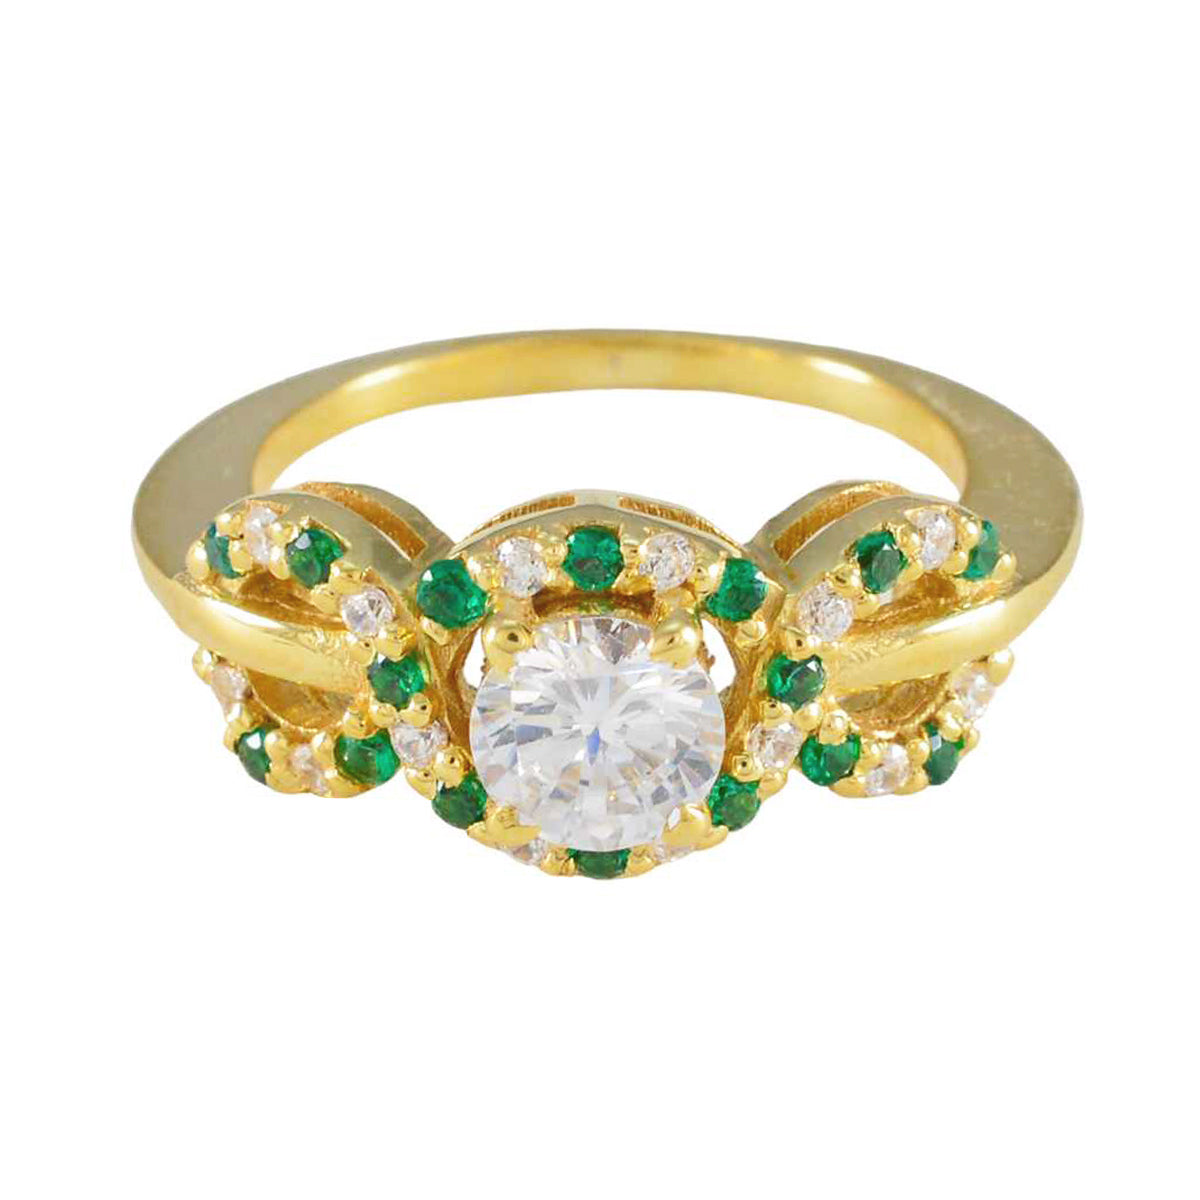 Riyo Indian Silver Ring With Yellow Gold Plating Emerald CZ Stone Round Shape Prong Setting  Jewelry Fathers Day Ring